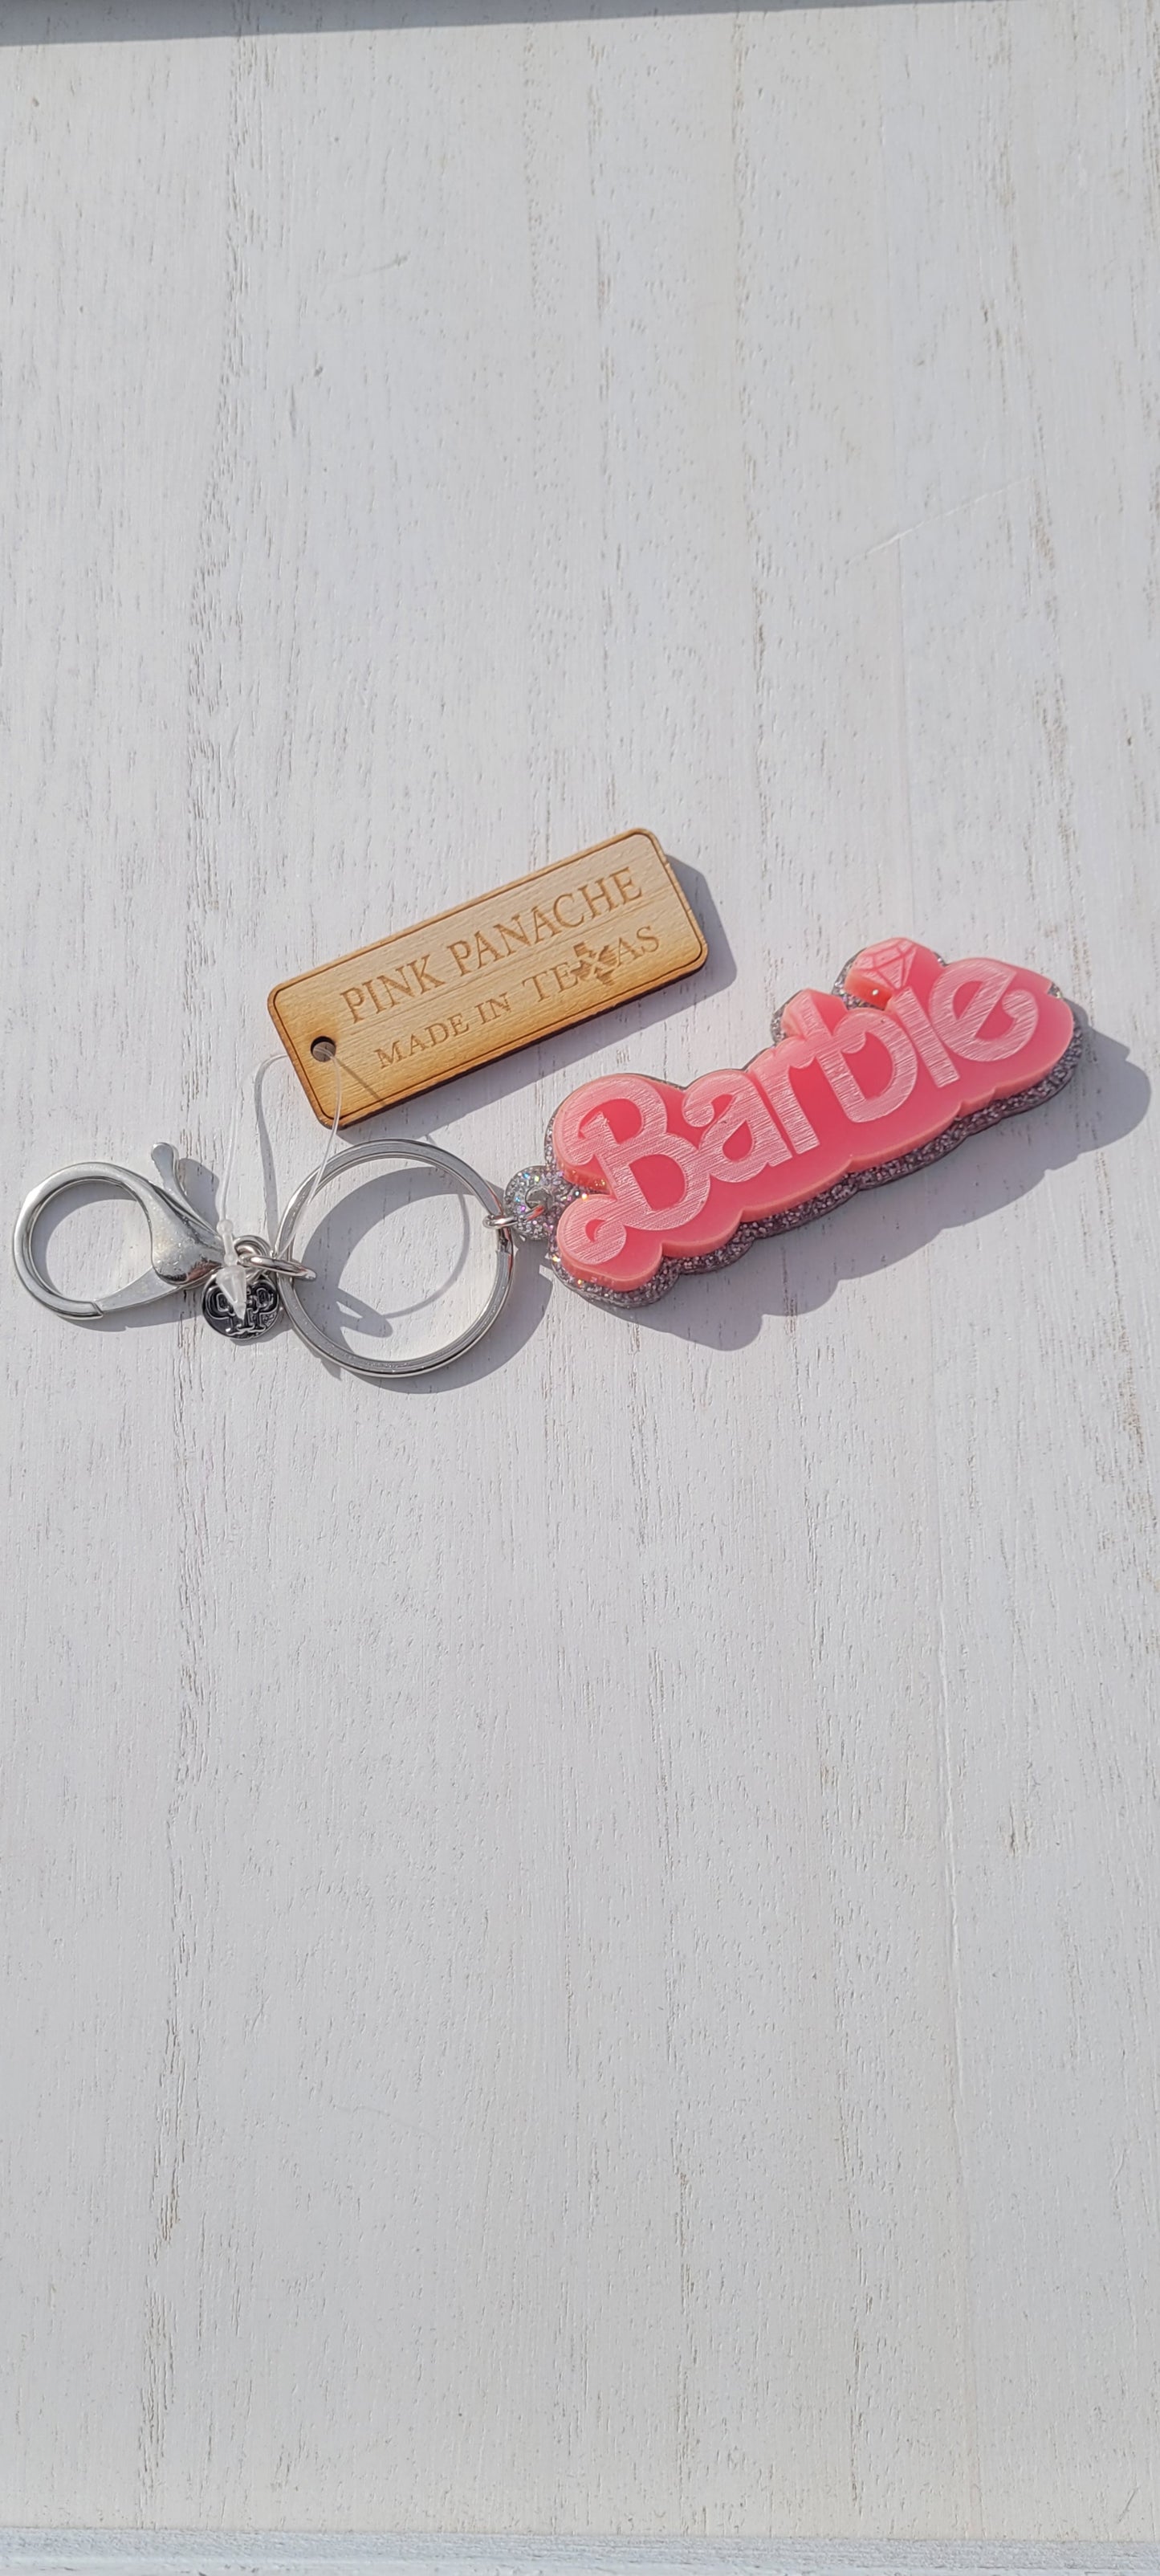 Pink Panache Keychain Color: Pink and silver glitter Barbie keychain Limited supply!